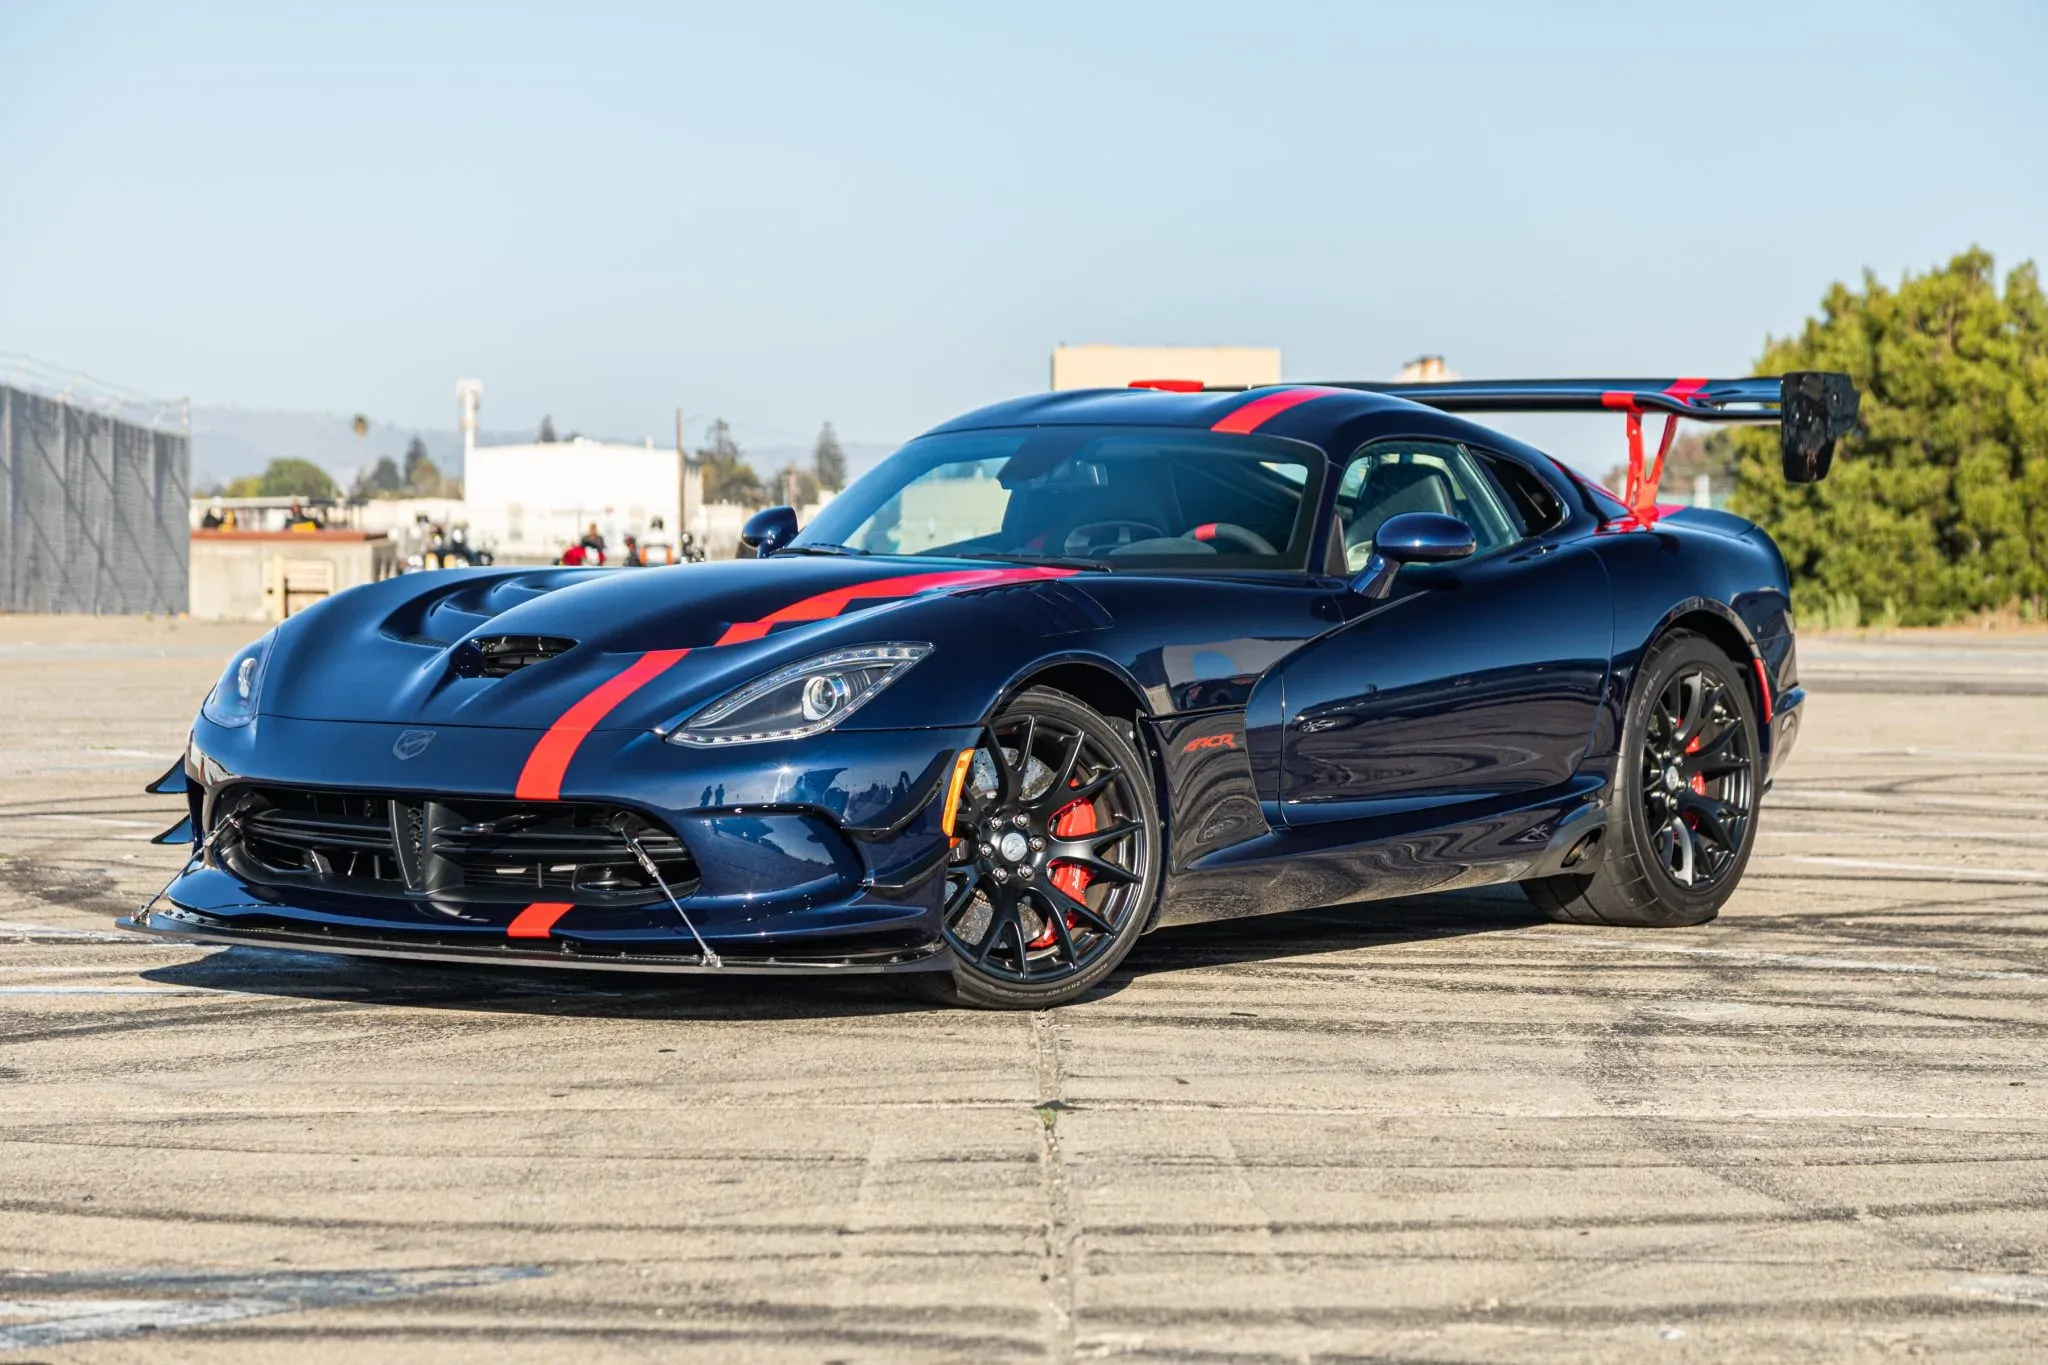 Black and red 2017 Dodge Viper ACR in a parking lot